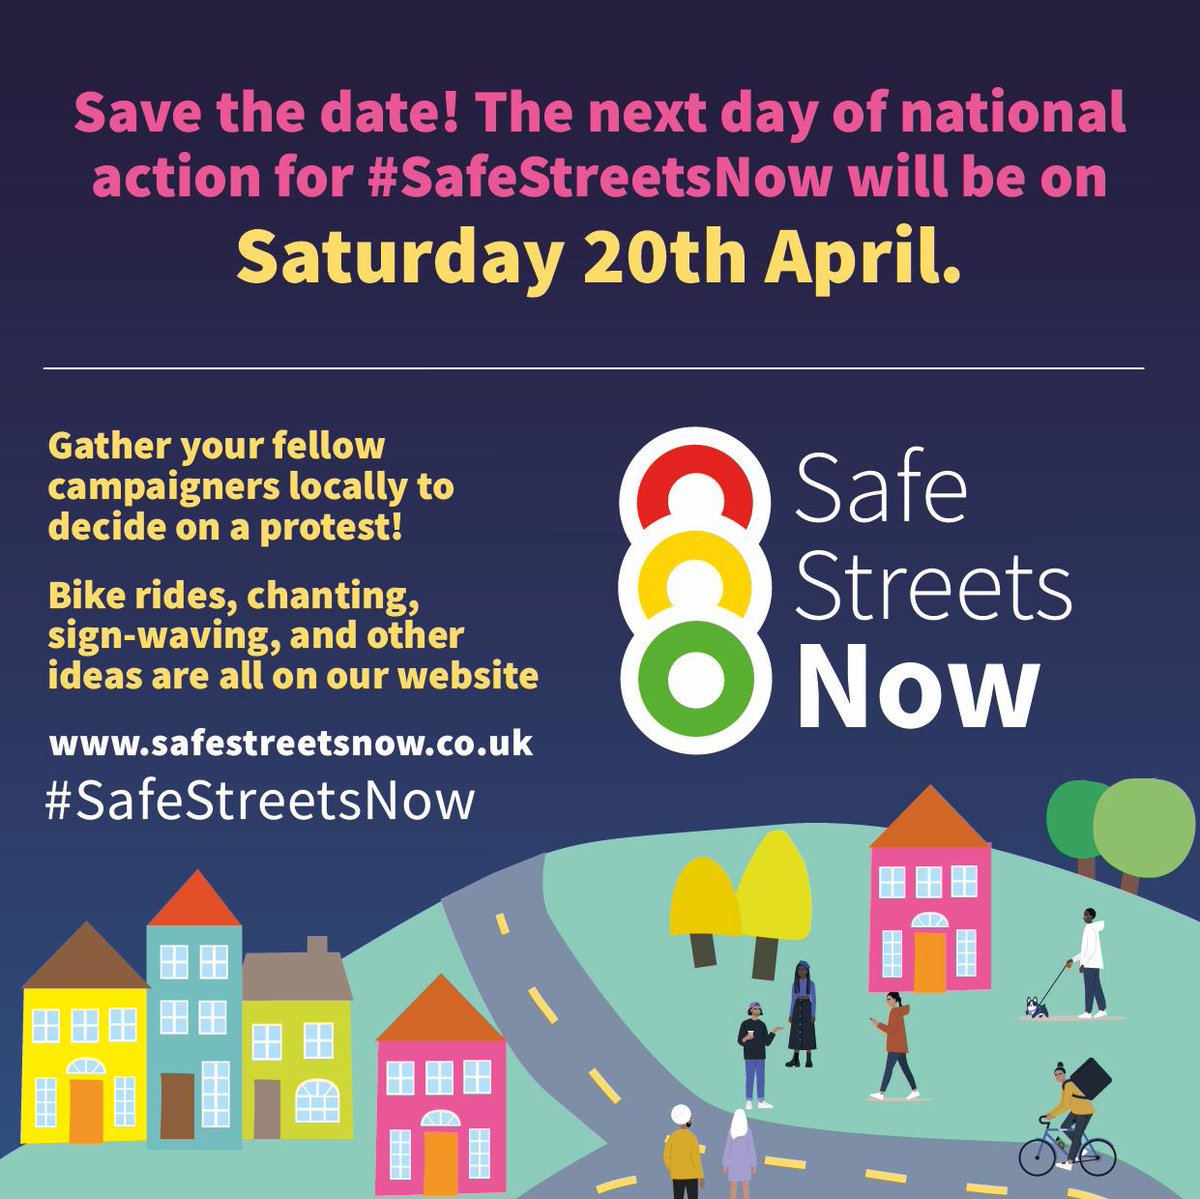 Nice to see this in @WeAreCyclingUK’s new magazine as we approach another wave of #kidicalmass rides across the UK, and beyond, in support of #SafeStreetsNow. Still not too late to join us all on April 20th (safestreetsnow.co.uk) 🙌 to @KidicalMassRead!